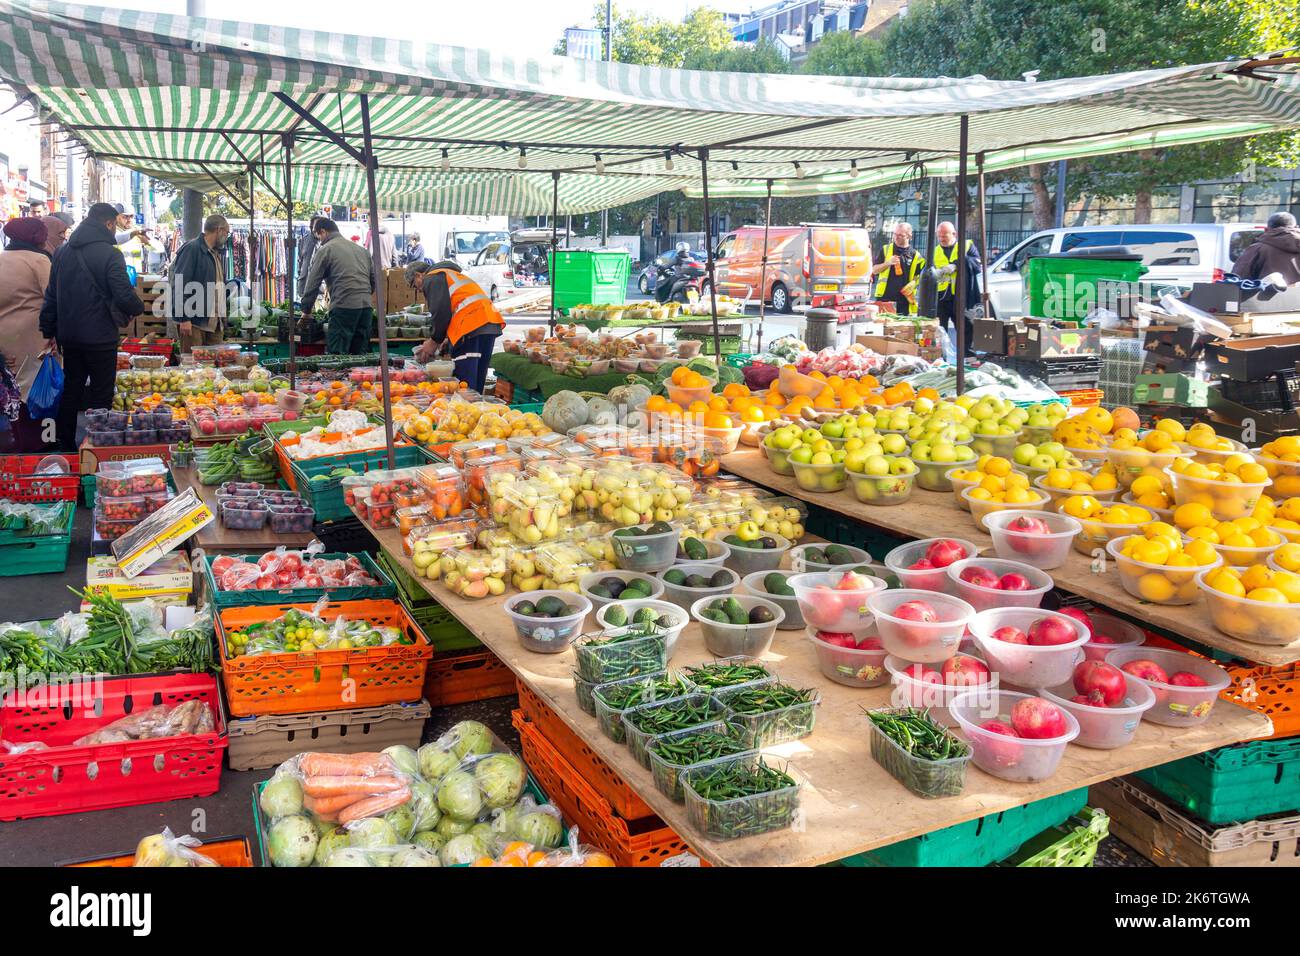 Fruit and vegetable stall in market, Whitechapel Road, Whitechapel, The London Borough of Tower Hamlets, Greater London, England, United Kingdom Stock Photo